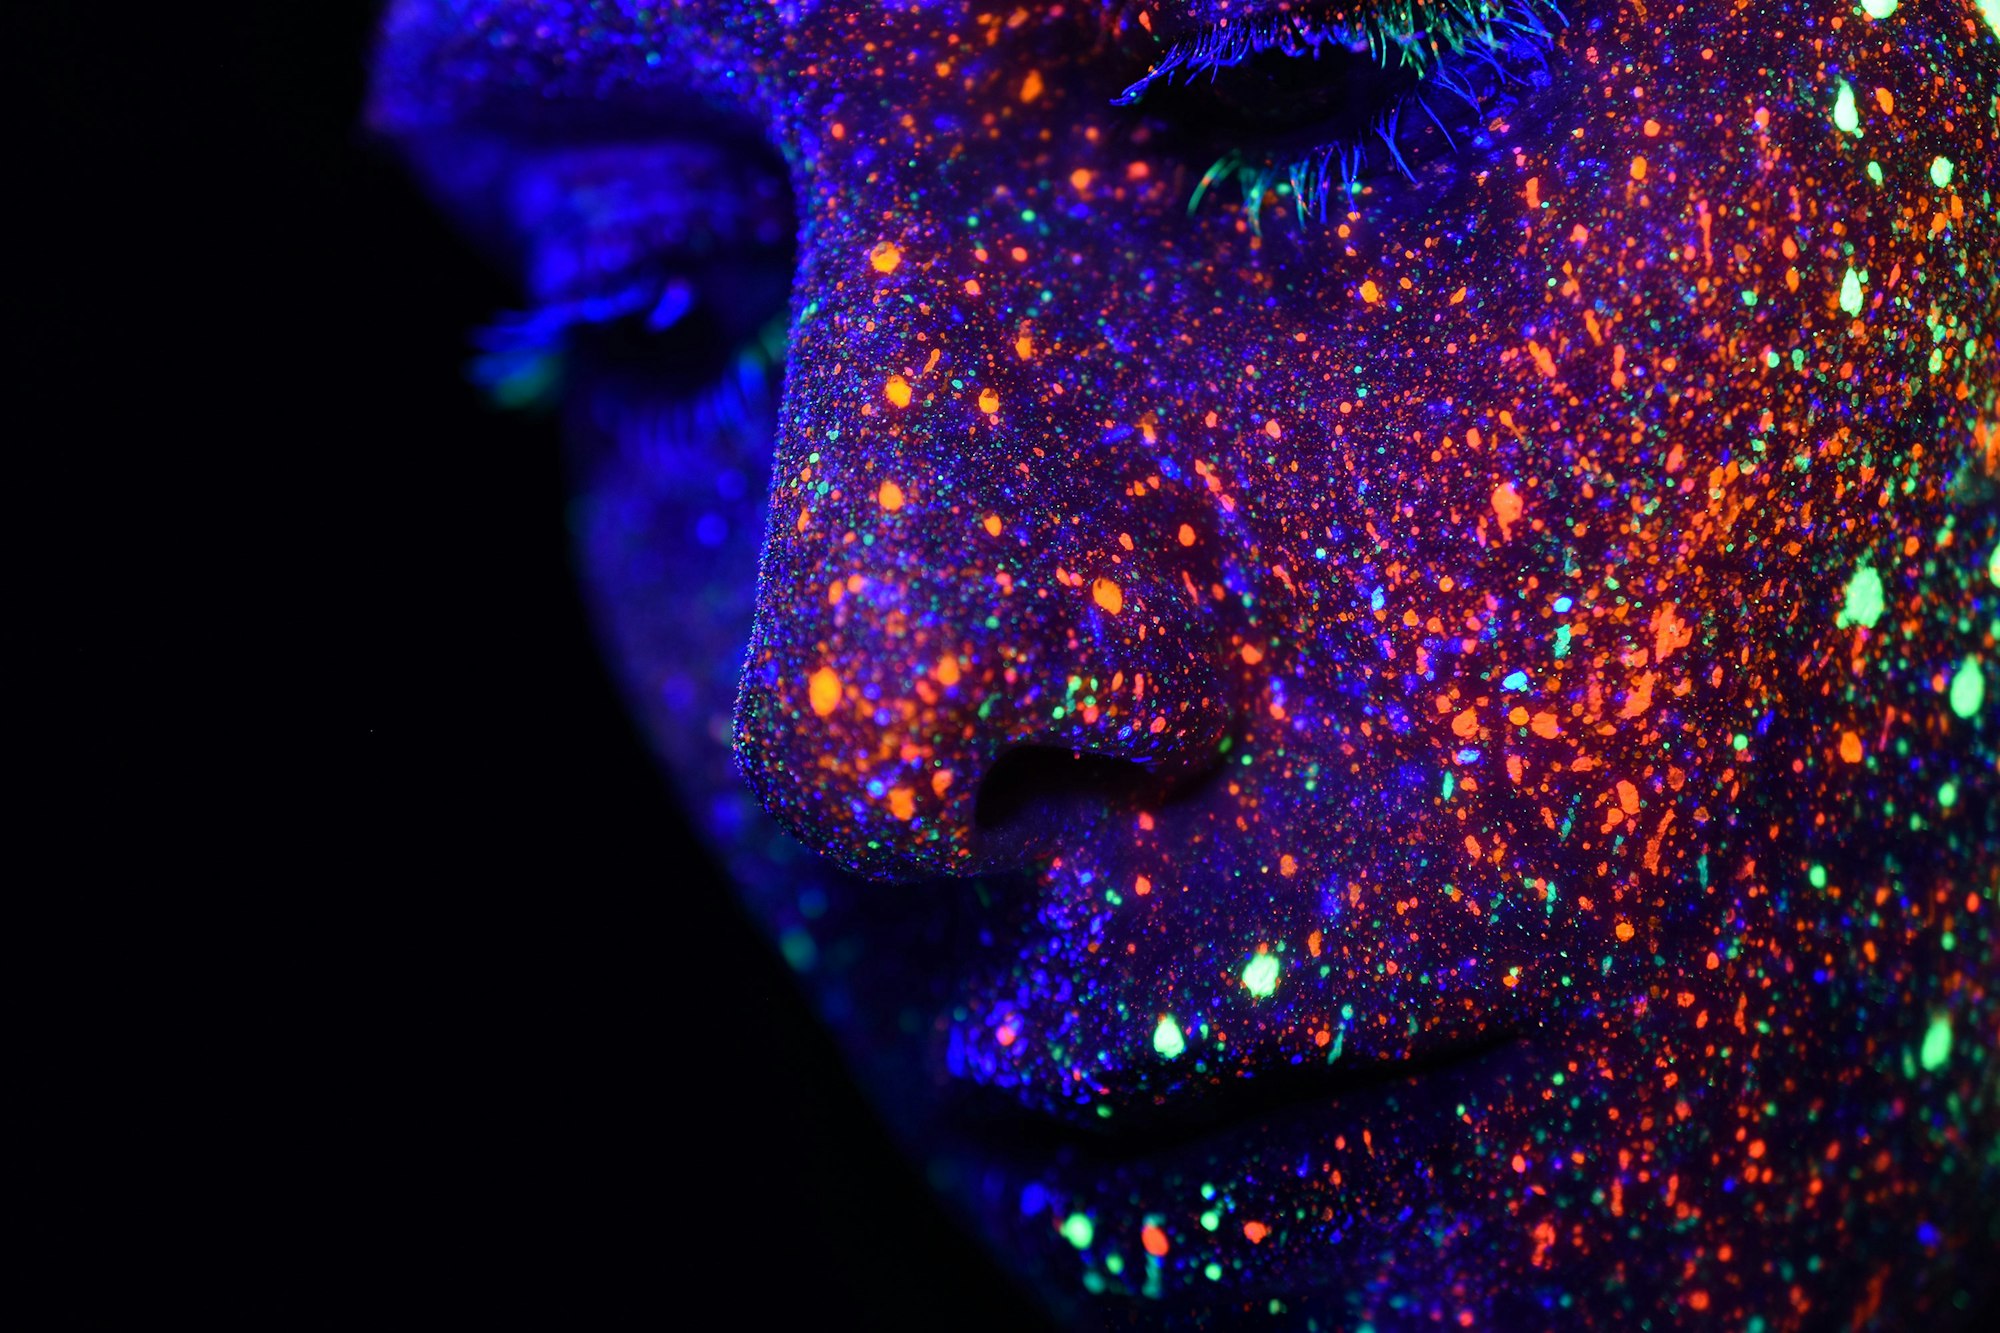 https://unsplash.com/@ic03r was inspired by some blacklight photographs he found on pinterest. We suggested that we could use the colors as sparcles to create a stunning galaxy feel. That is the outcome. We plan to do another series following real star signs on face and body.